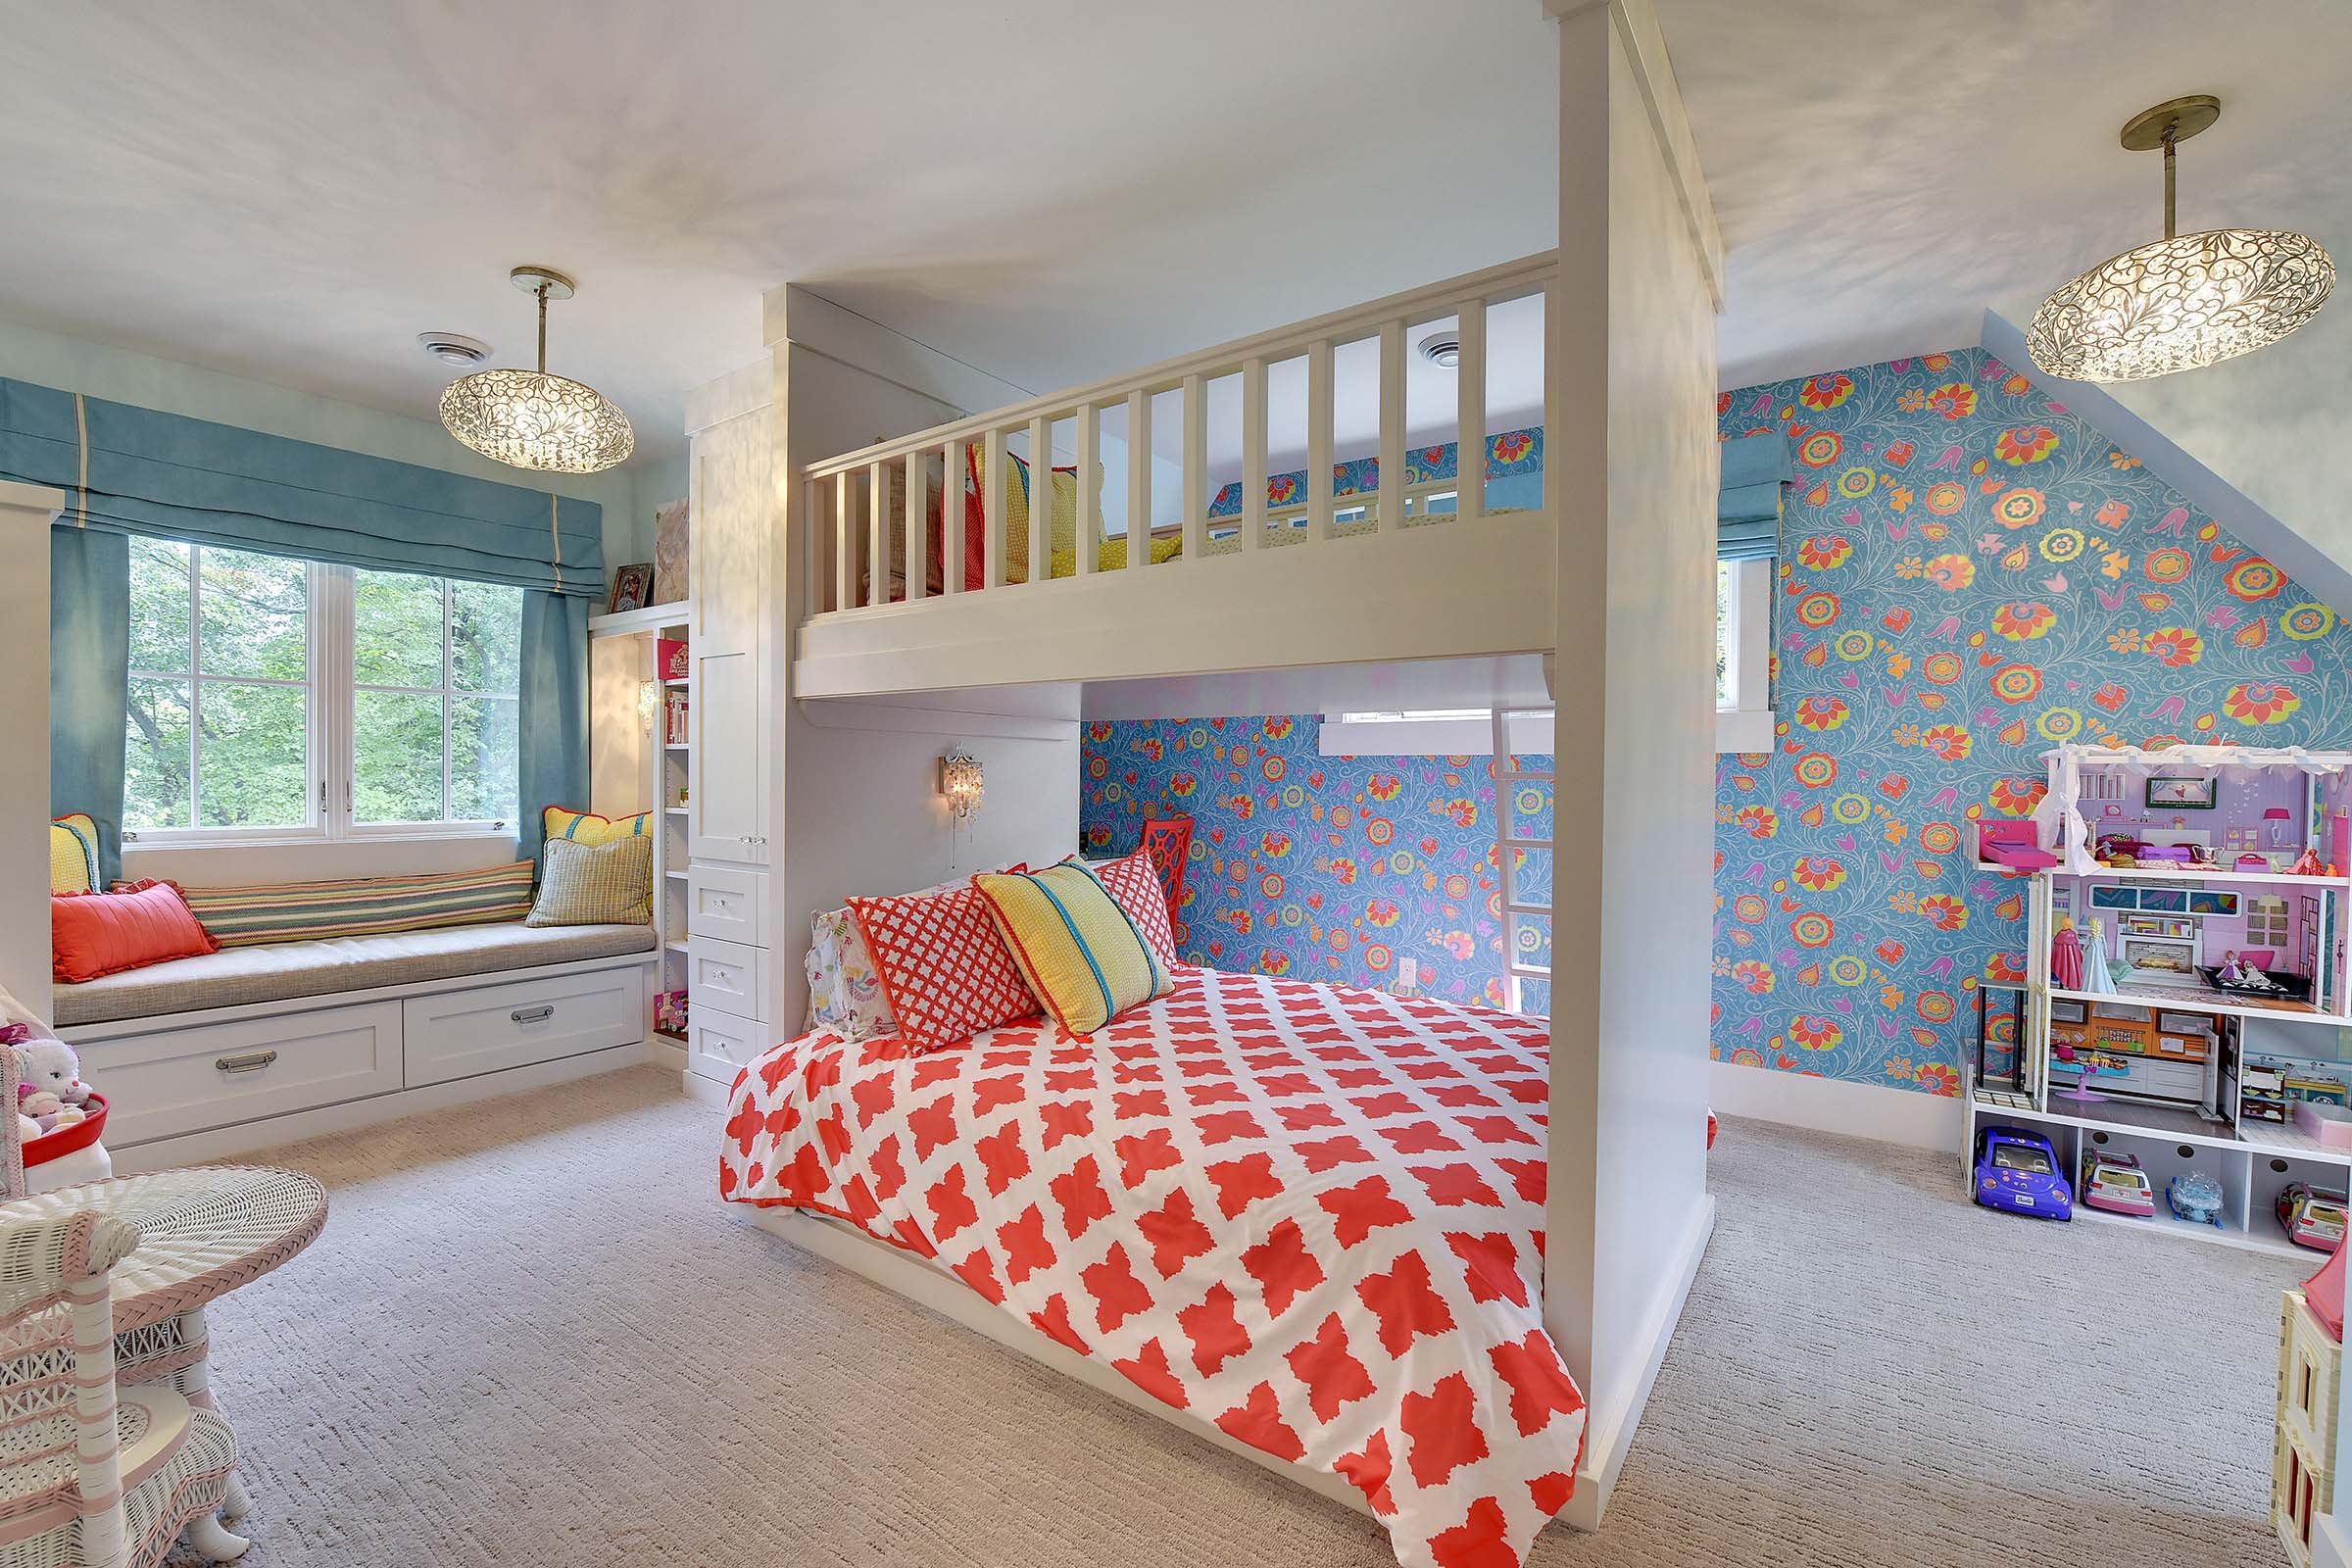 A children's bedroom with a bunk bed, a desk.